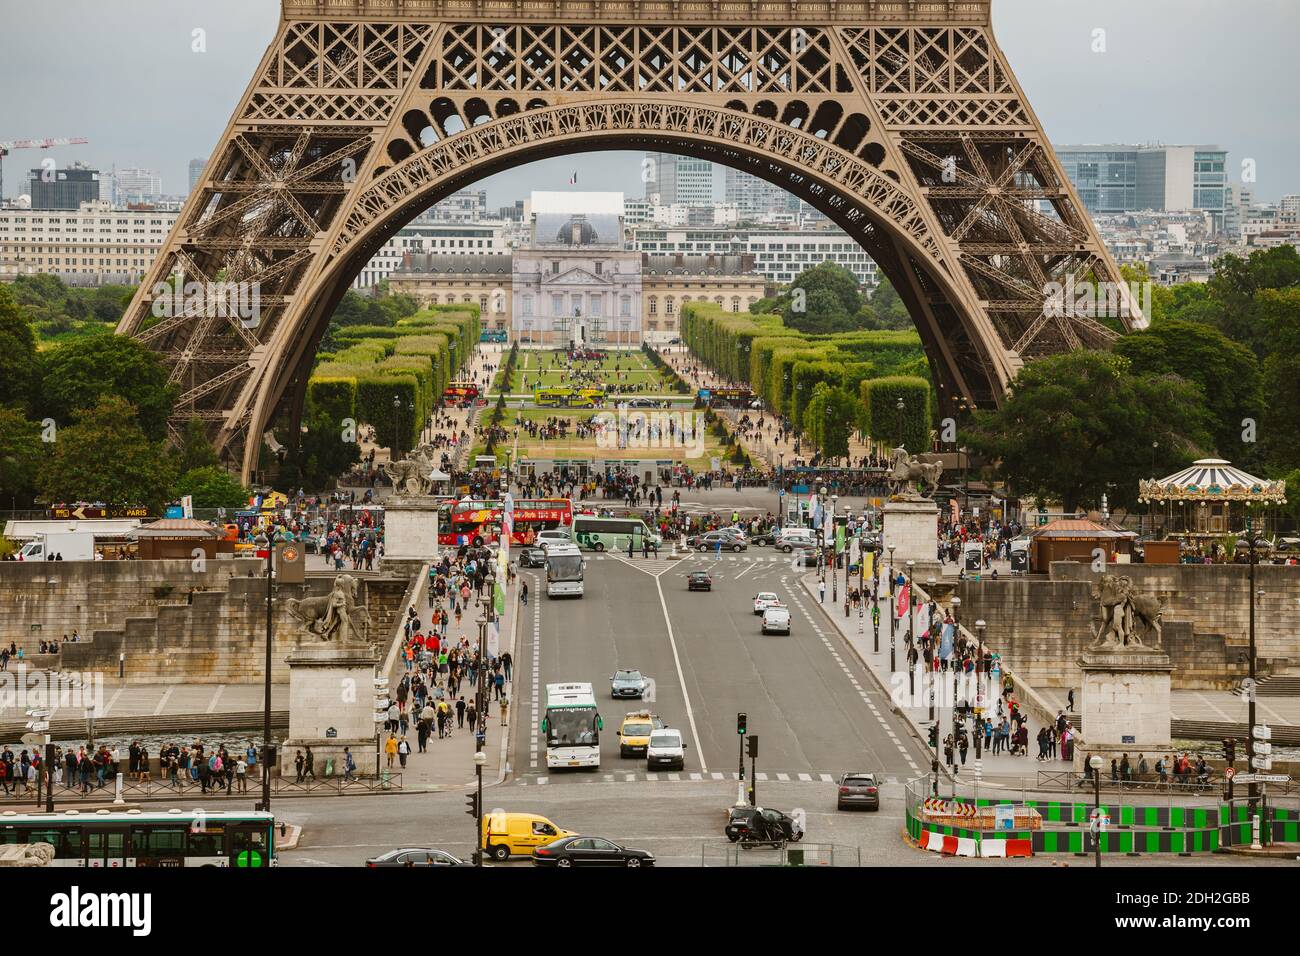 Paris, France July 24, 2017: Eiffel Tower close-up of a road with cars and buses traffic from a transporter, passage under an ar Stock Photo